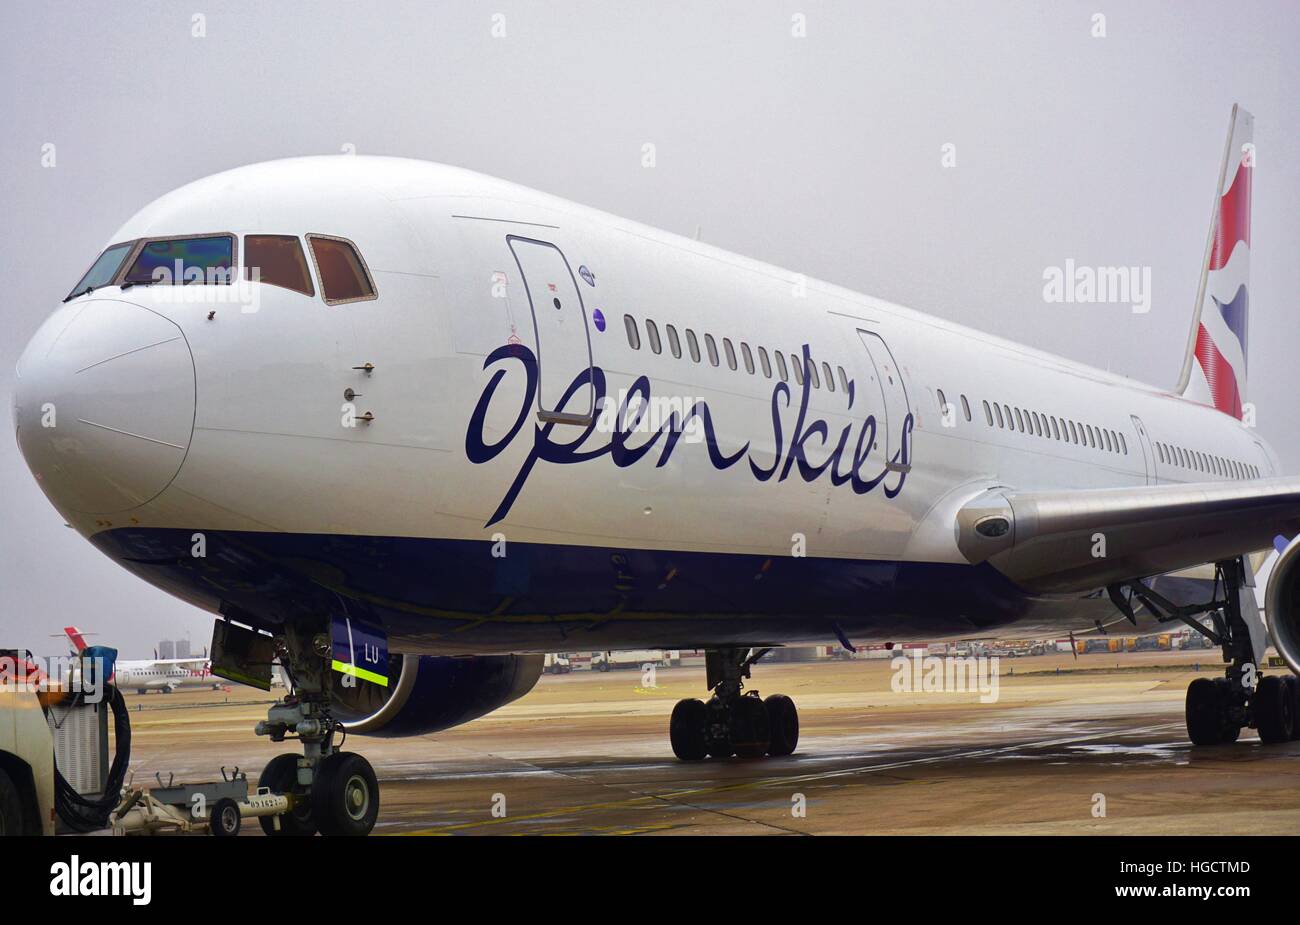 An Open Skies (EC) Boeing 767 airplane at Orly Airport (ORY), located south of Paris. Open Skies belongs to British Airways (BA) Stock Photo